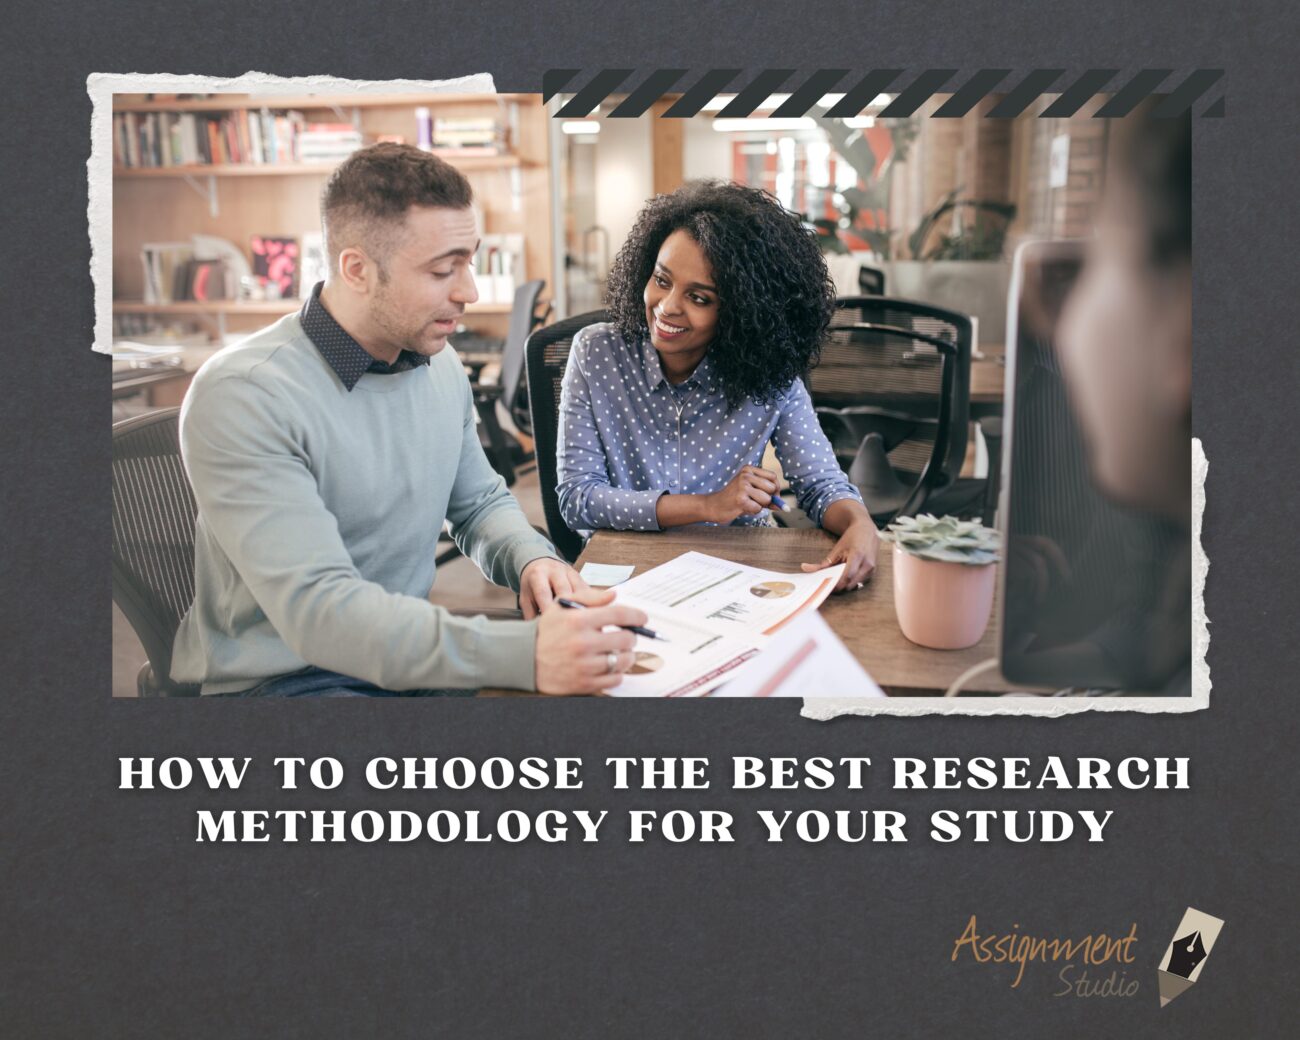 How to Choose the Best Research Methodology for your Study